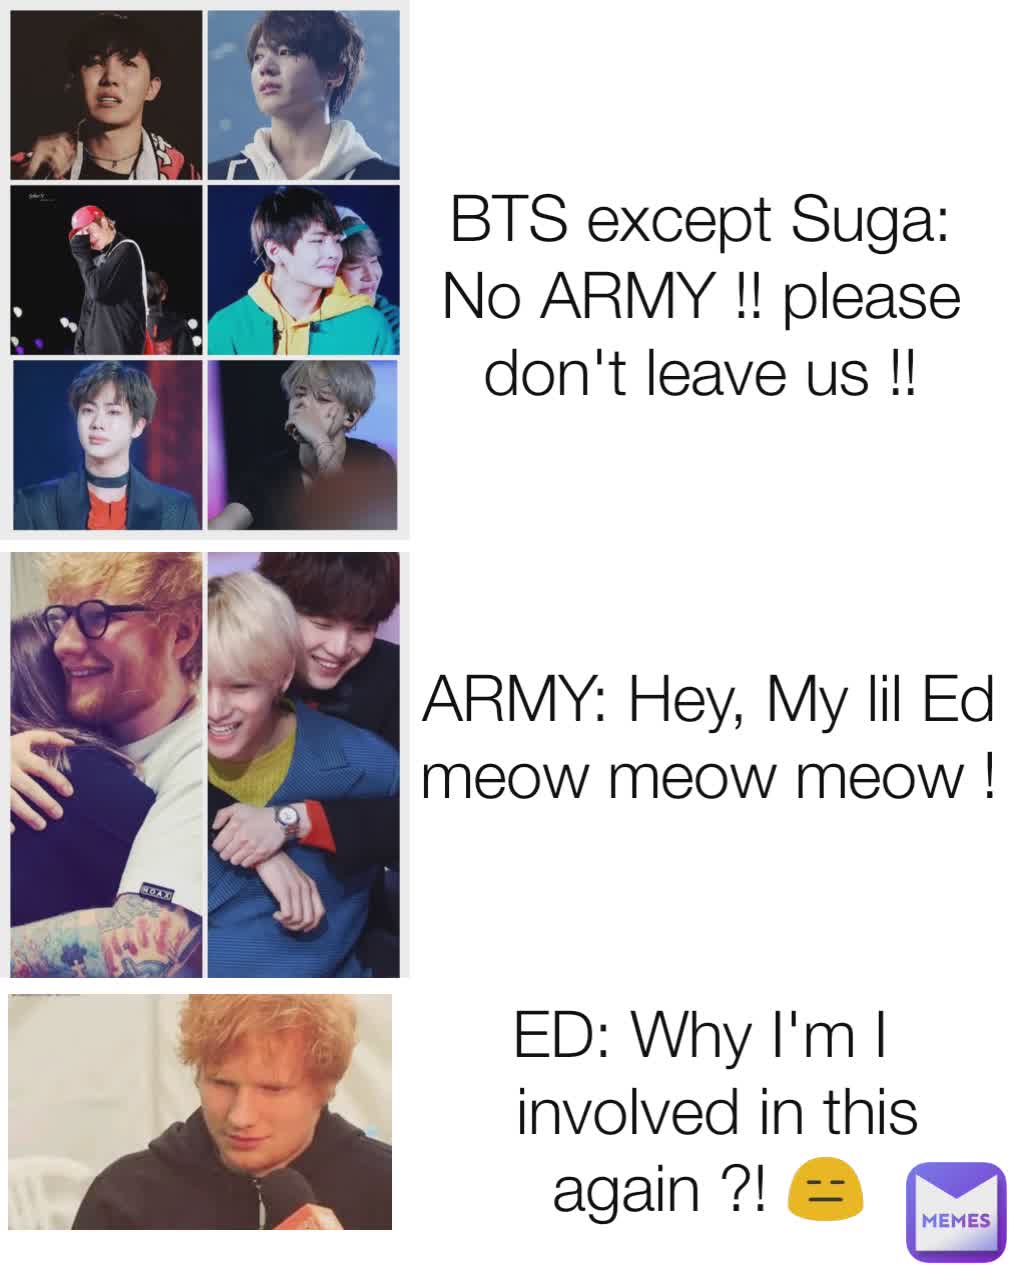 BTS except Suga: No ARMY !! please don't leave us !! ED: Why I'm I 
 involved in this again ?! 😑 ARMY: Hey, My lil Ed meow meow meow !